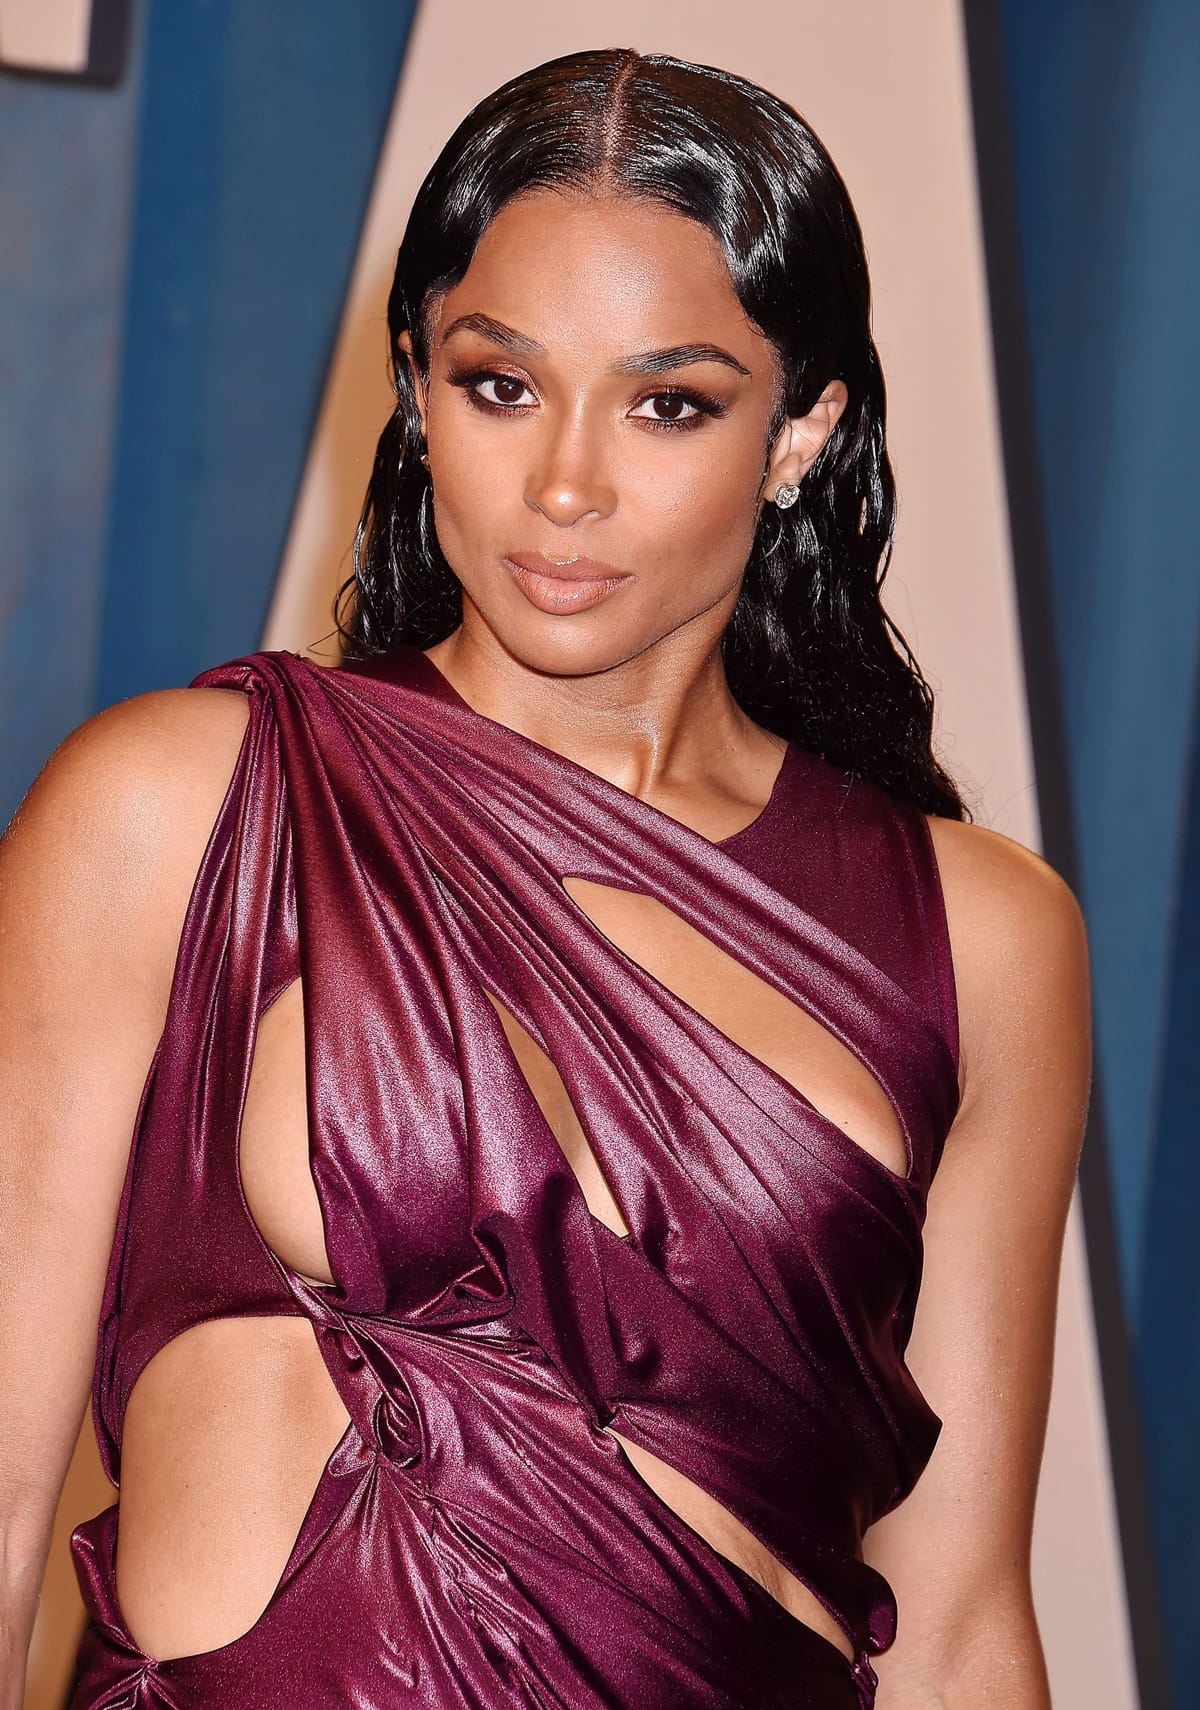 Ciara looked wet with slicked-back hair in a Di Petsa Spring 2022 dress